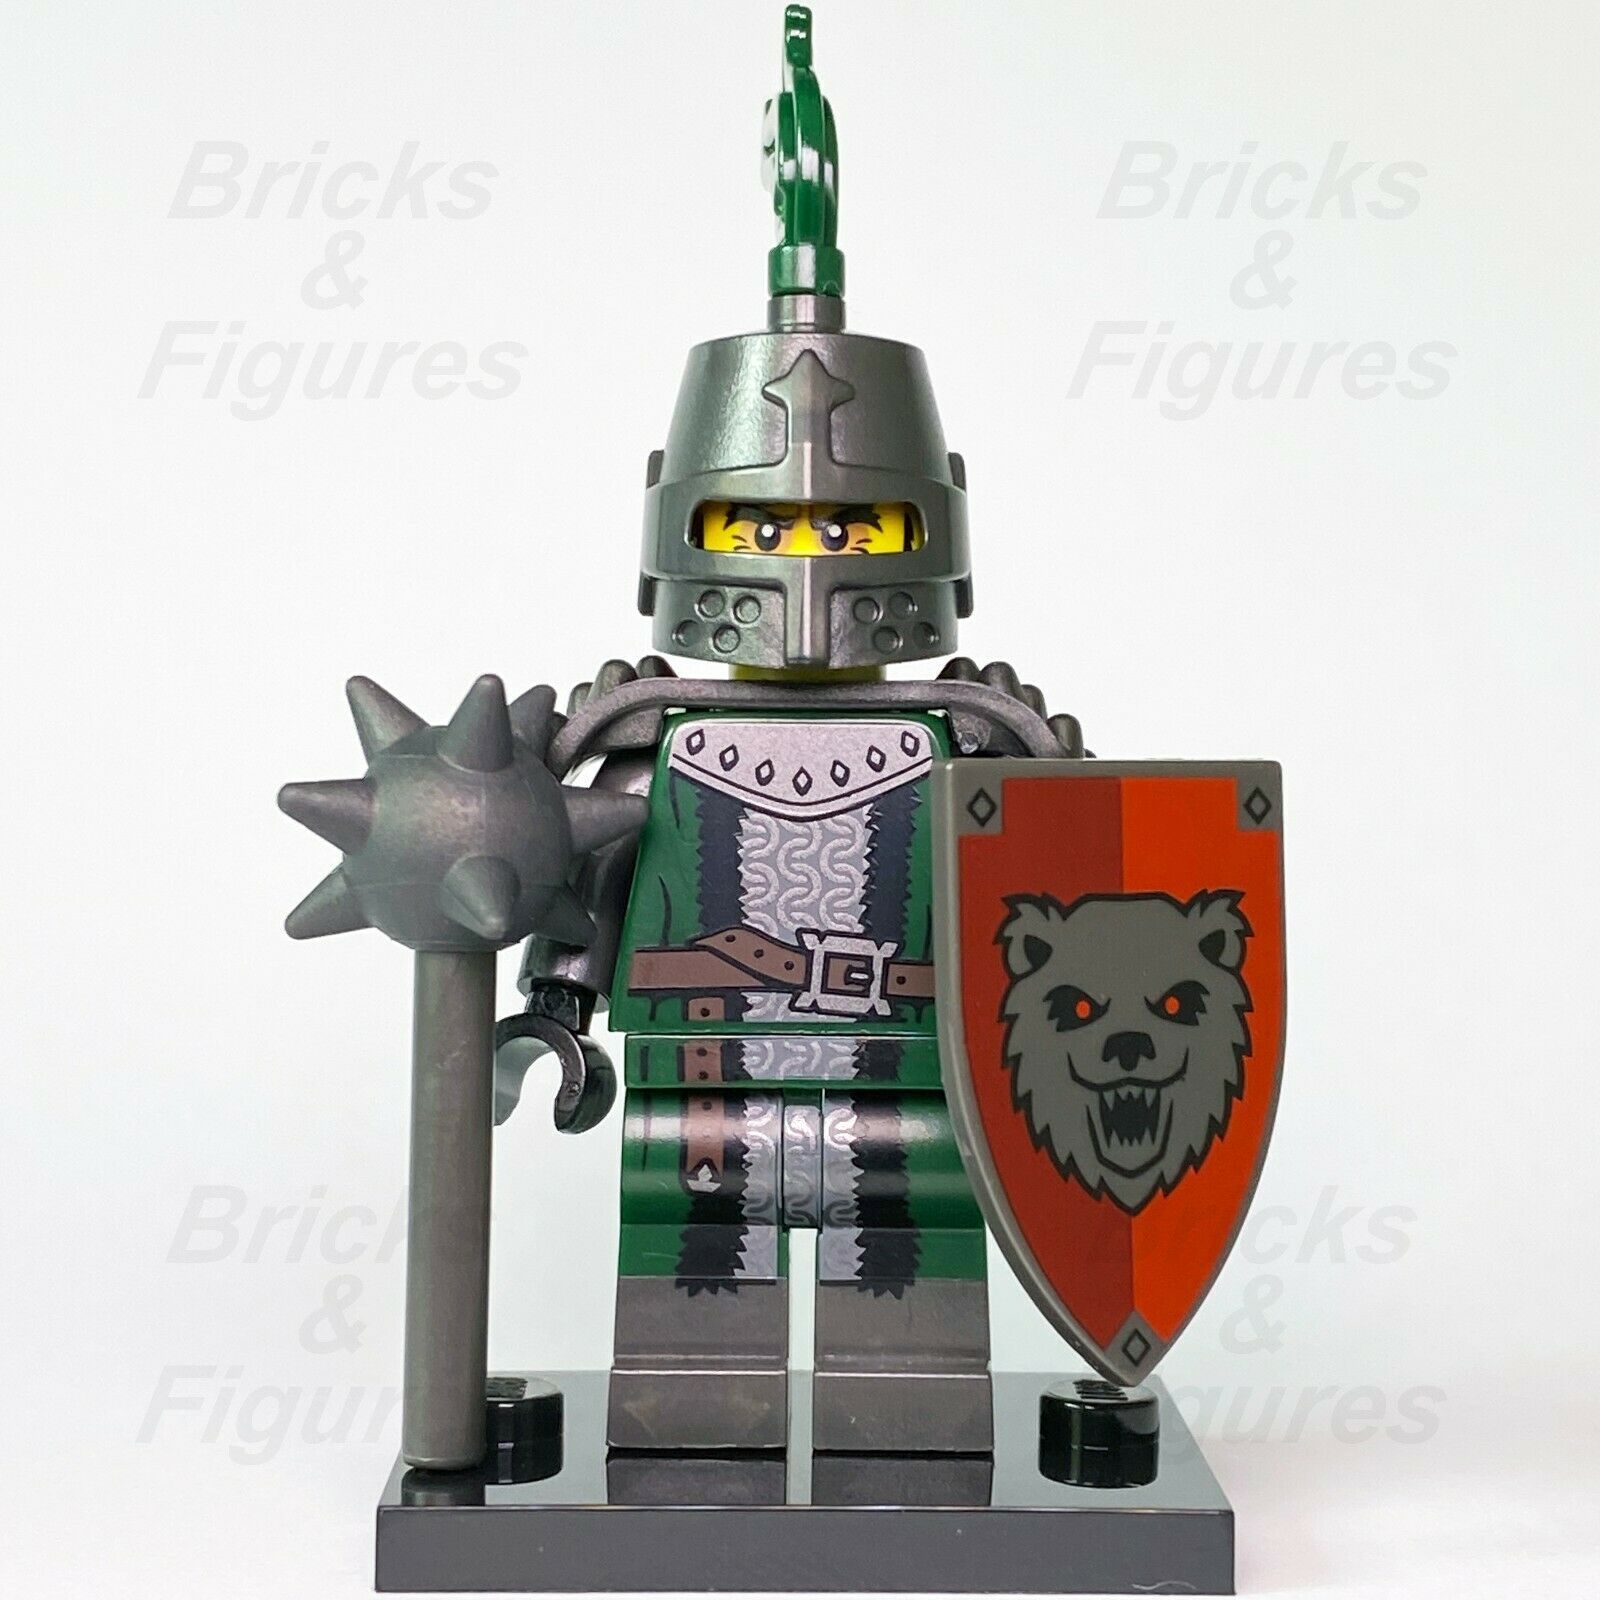 Collectible Minifigures LEGO Frightening Knight Series 15 Minifig 71011 - Bricks & Figures